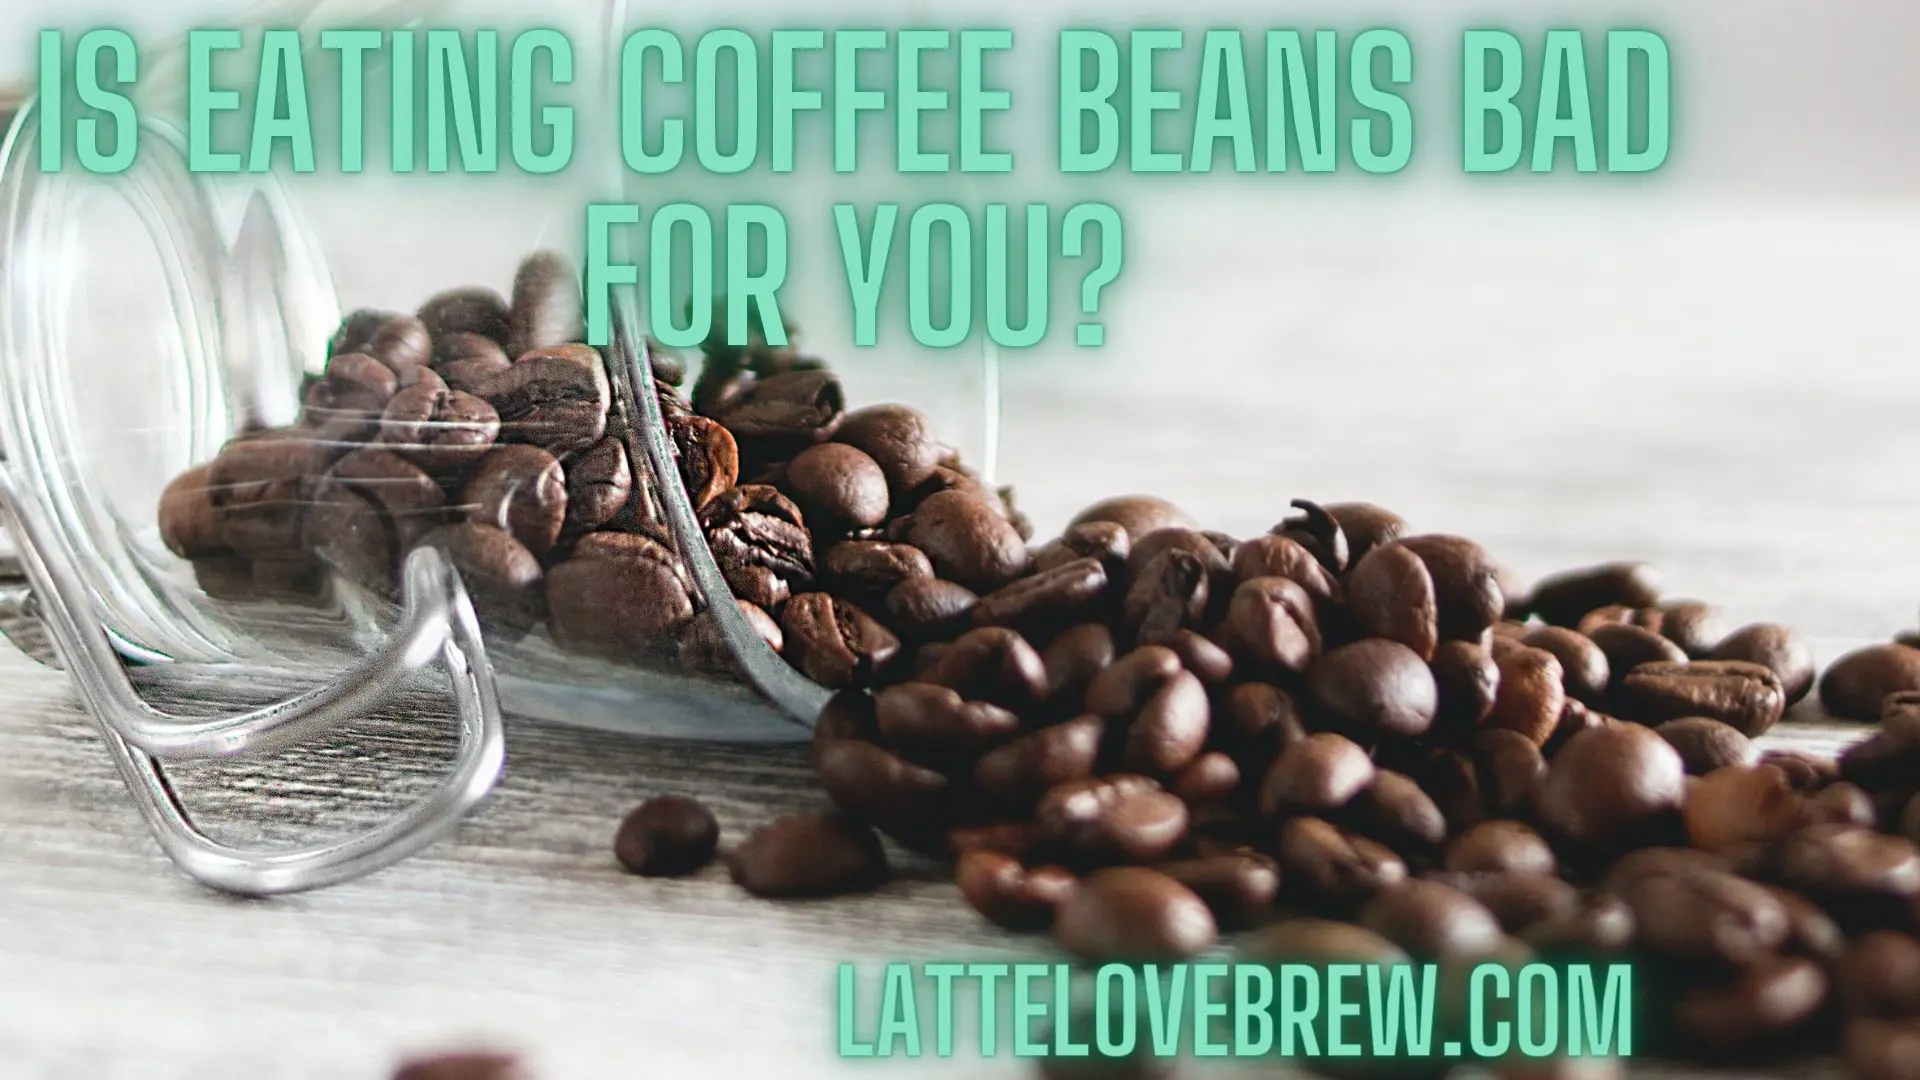 Is Eating Coffee Beans Bad For You? - Latte Love Brew